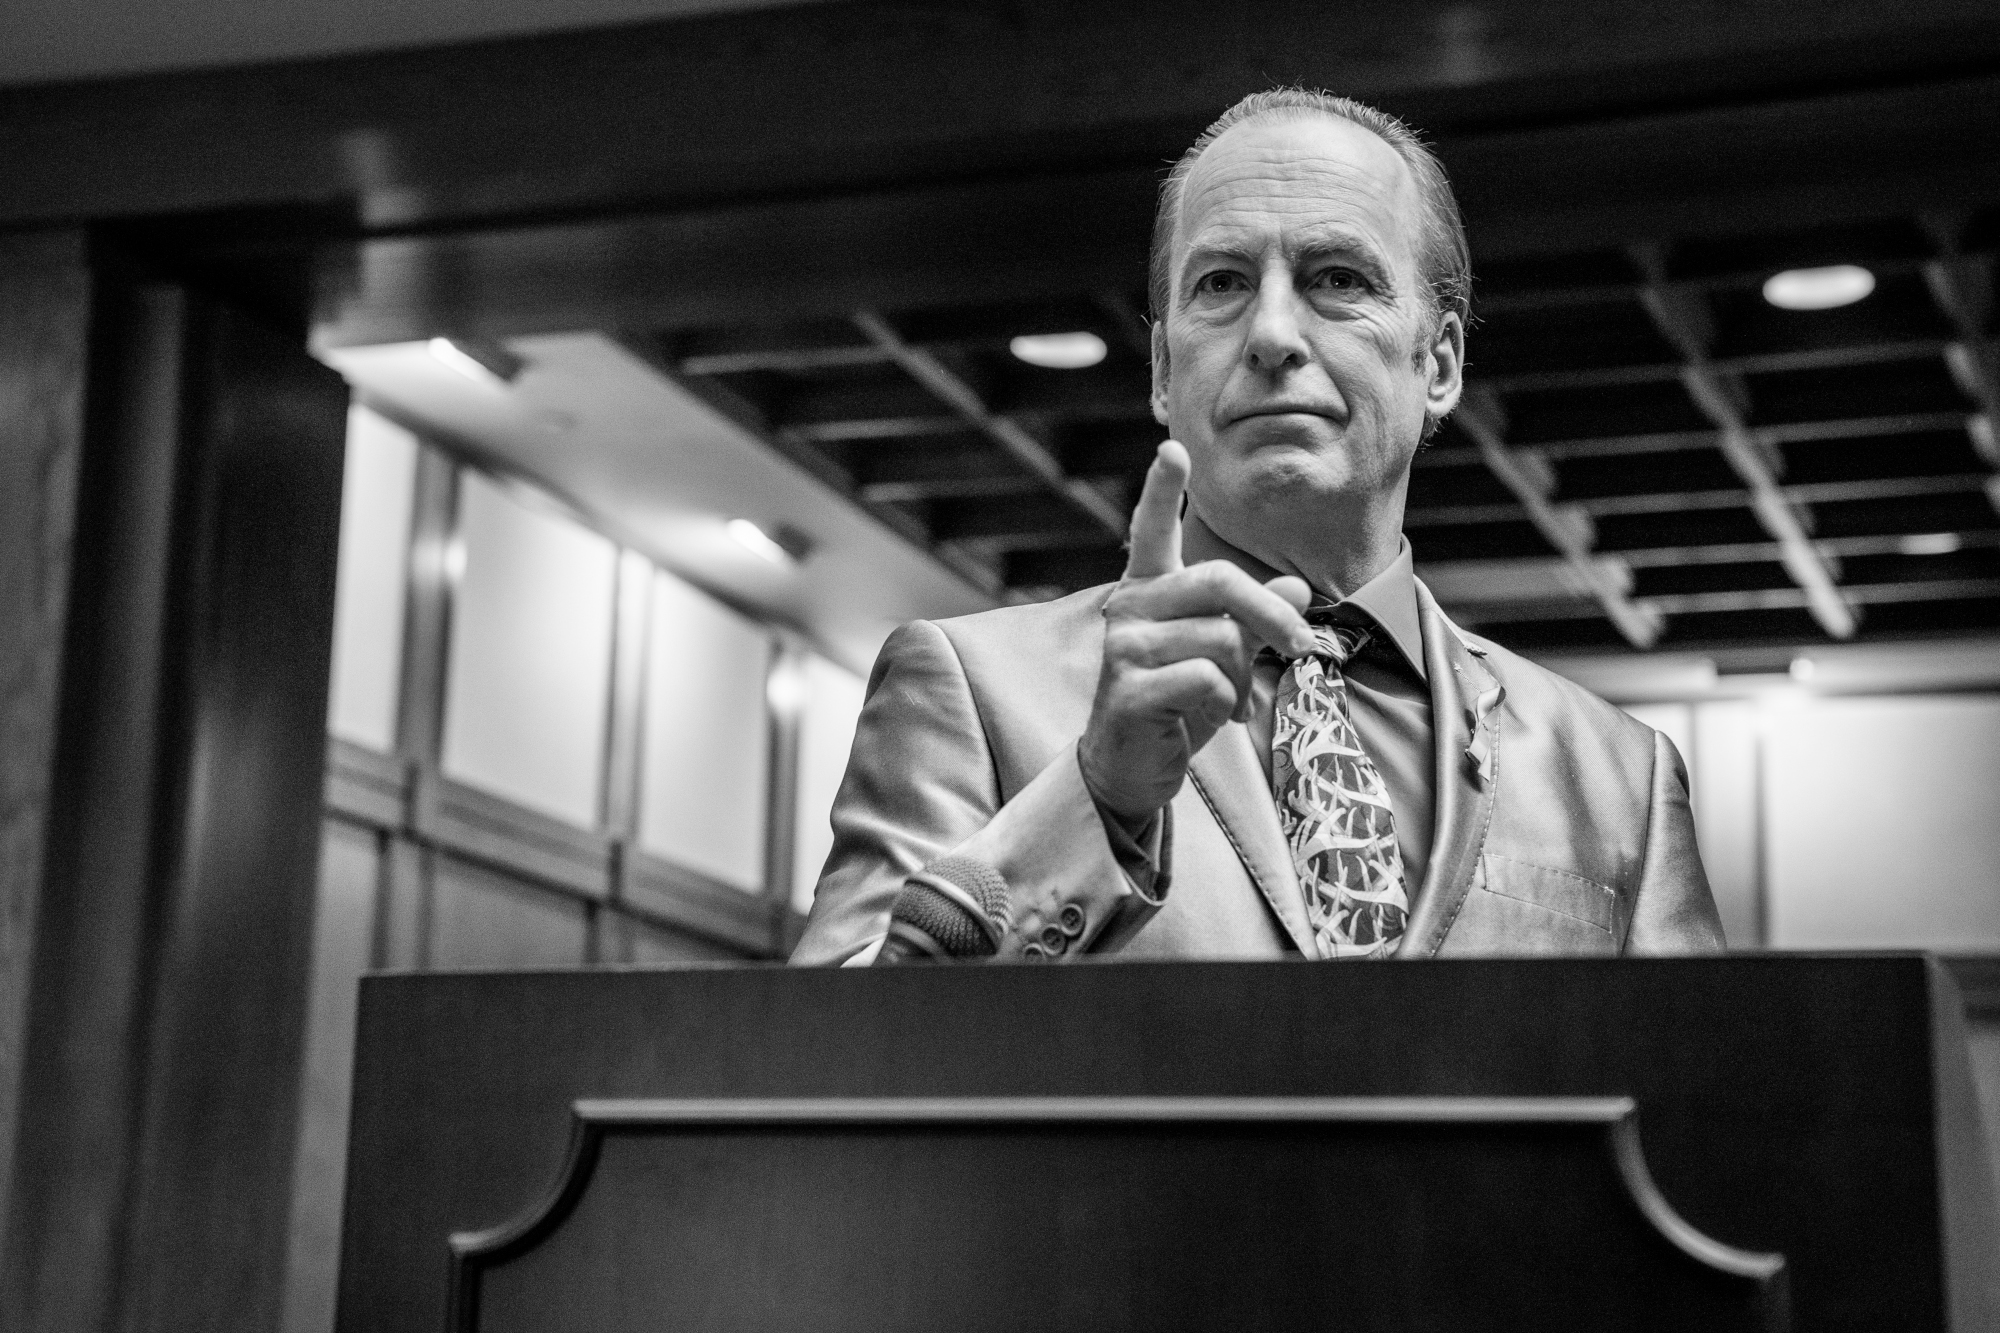 Bob Odenkirk at the ending of 'Better Call Saul' Season 6. He's standing at a podium in a courtroom and pointing forward.